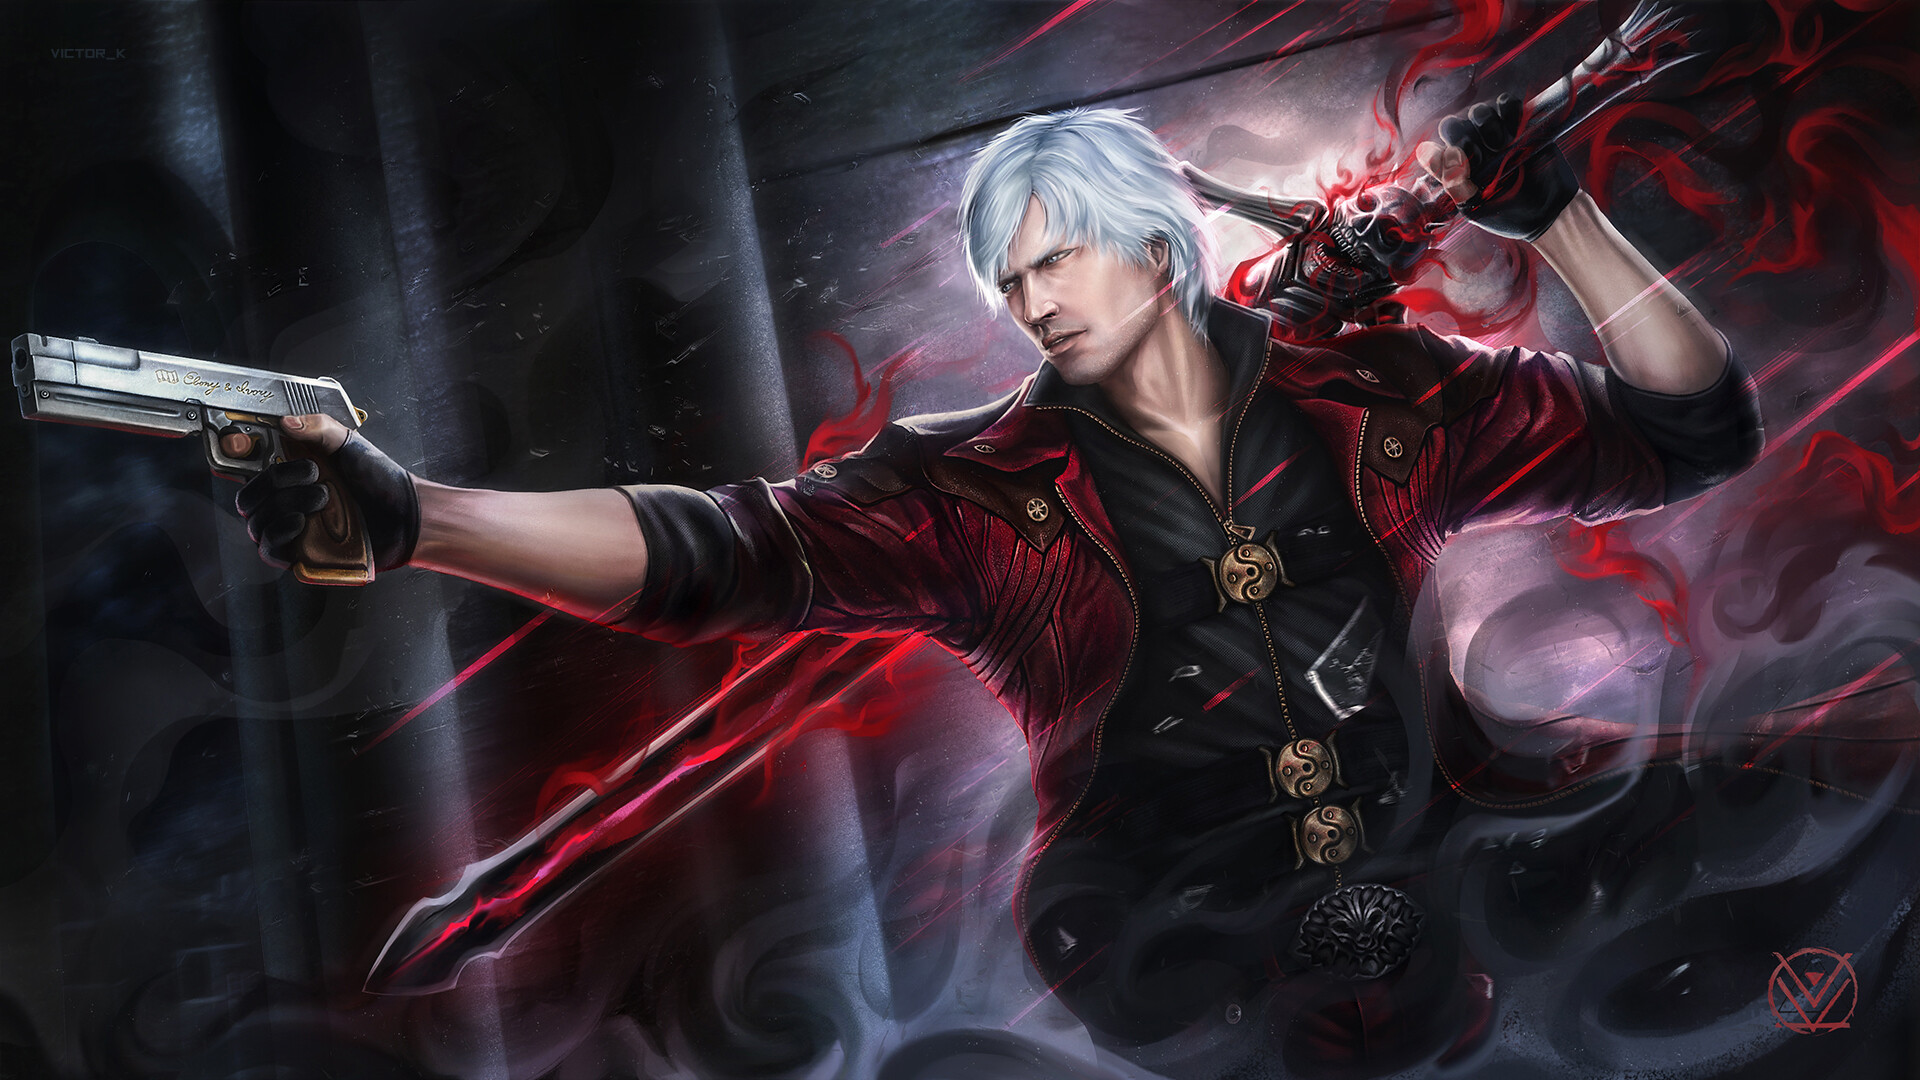 Games devil may cry. Данте Devil May Cry. Данте девил май край 5. Данте девил май край 4. Данте ДМС 5.